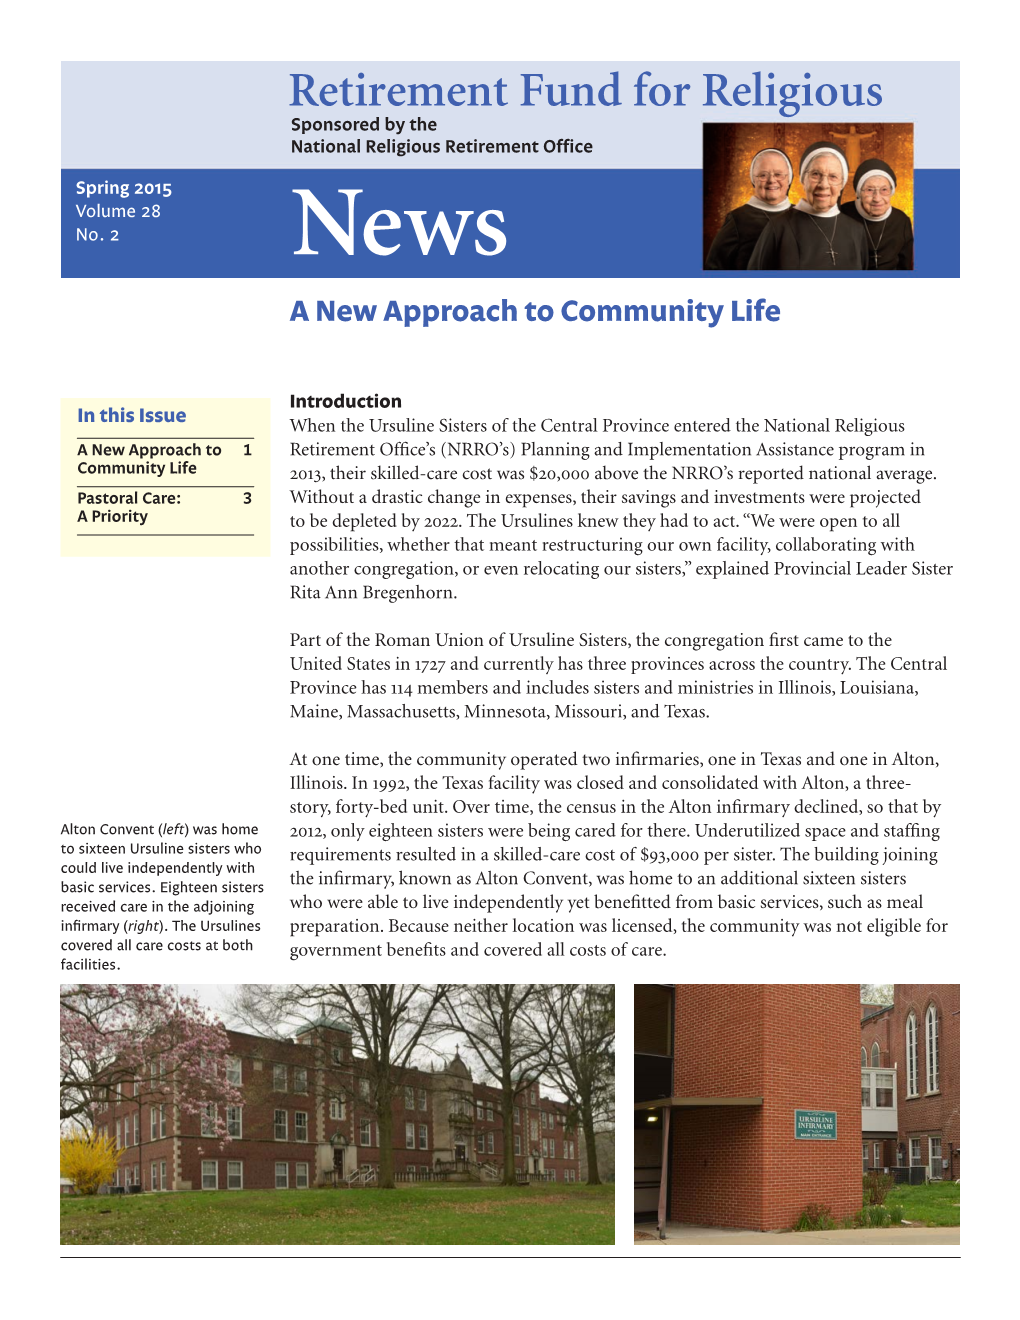 News a New Approach to Community Life